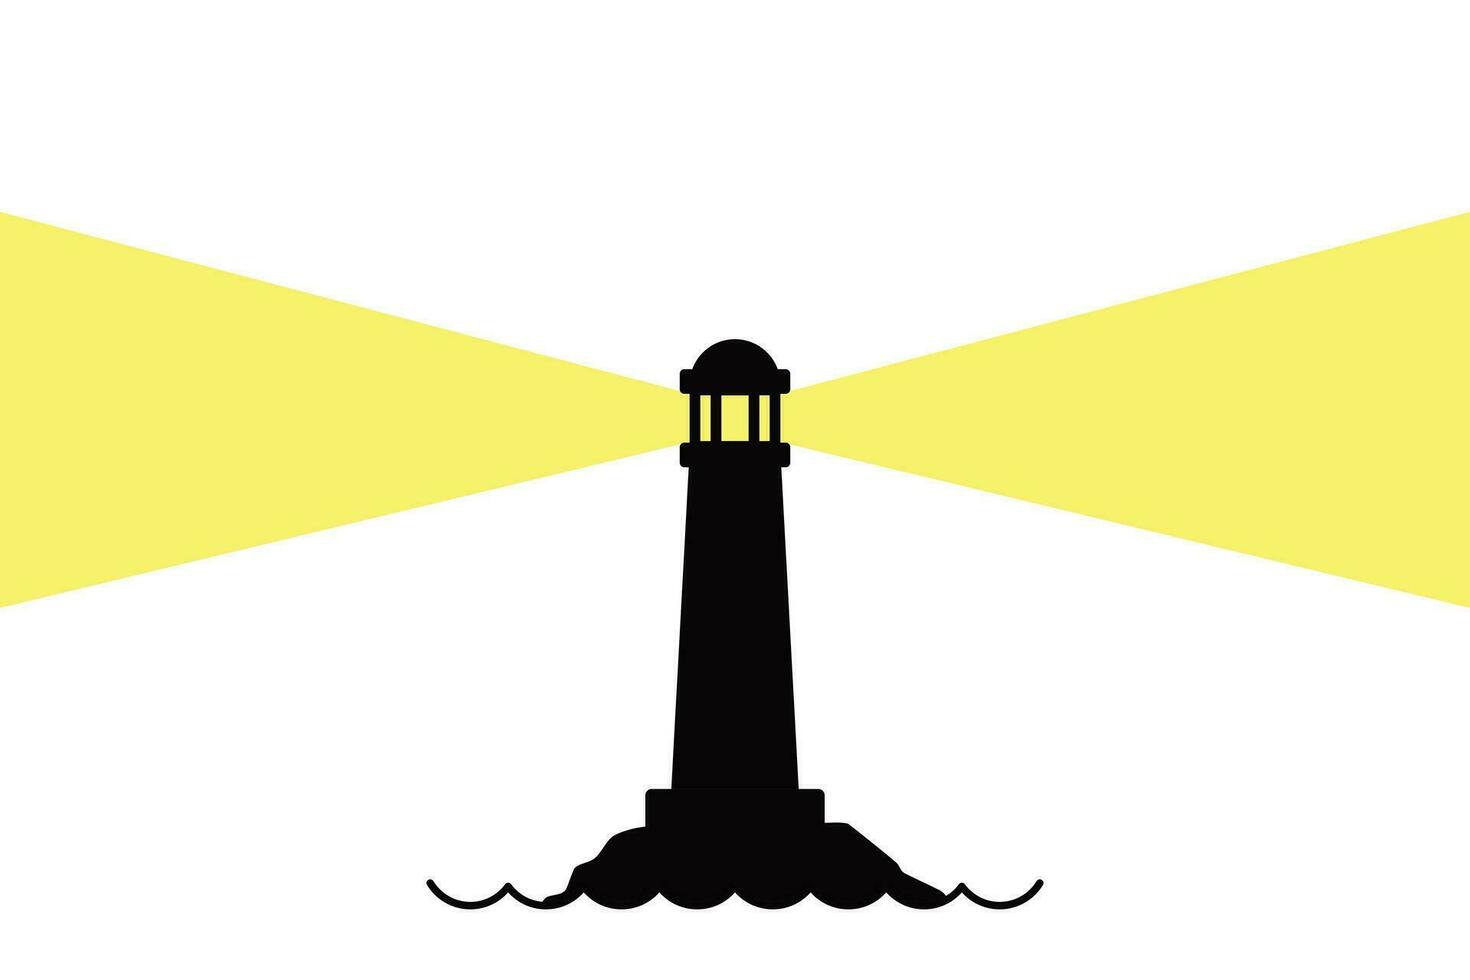 Lighthouse silhouette at night with yellow light shining, background vector illustration nobody